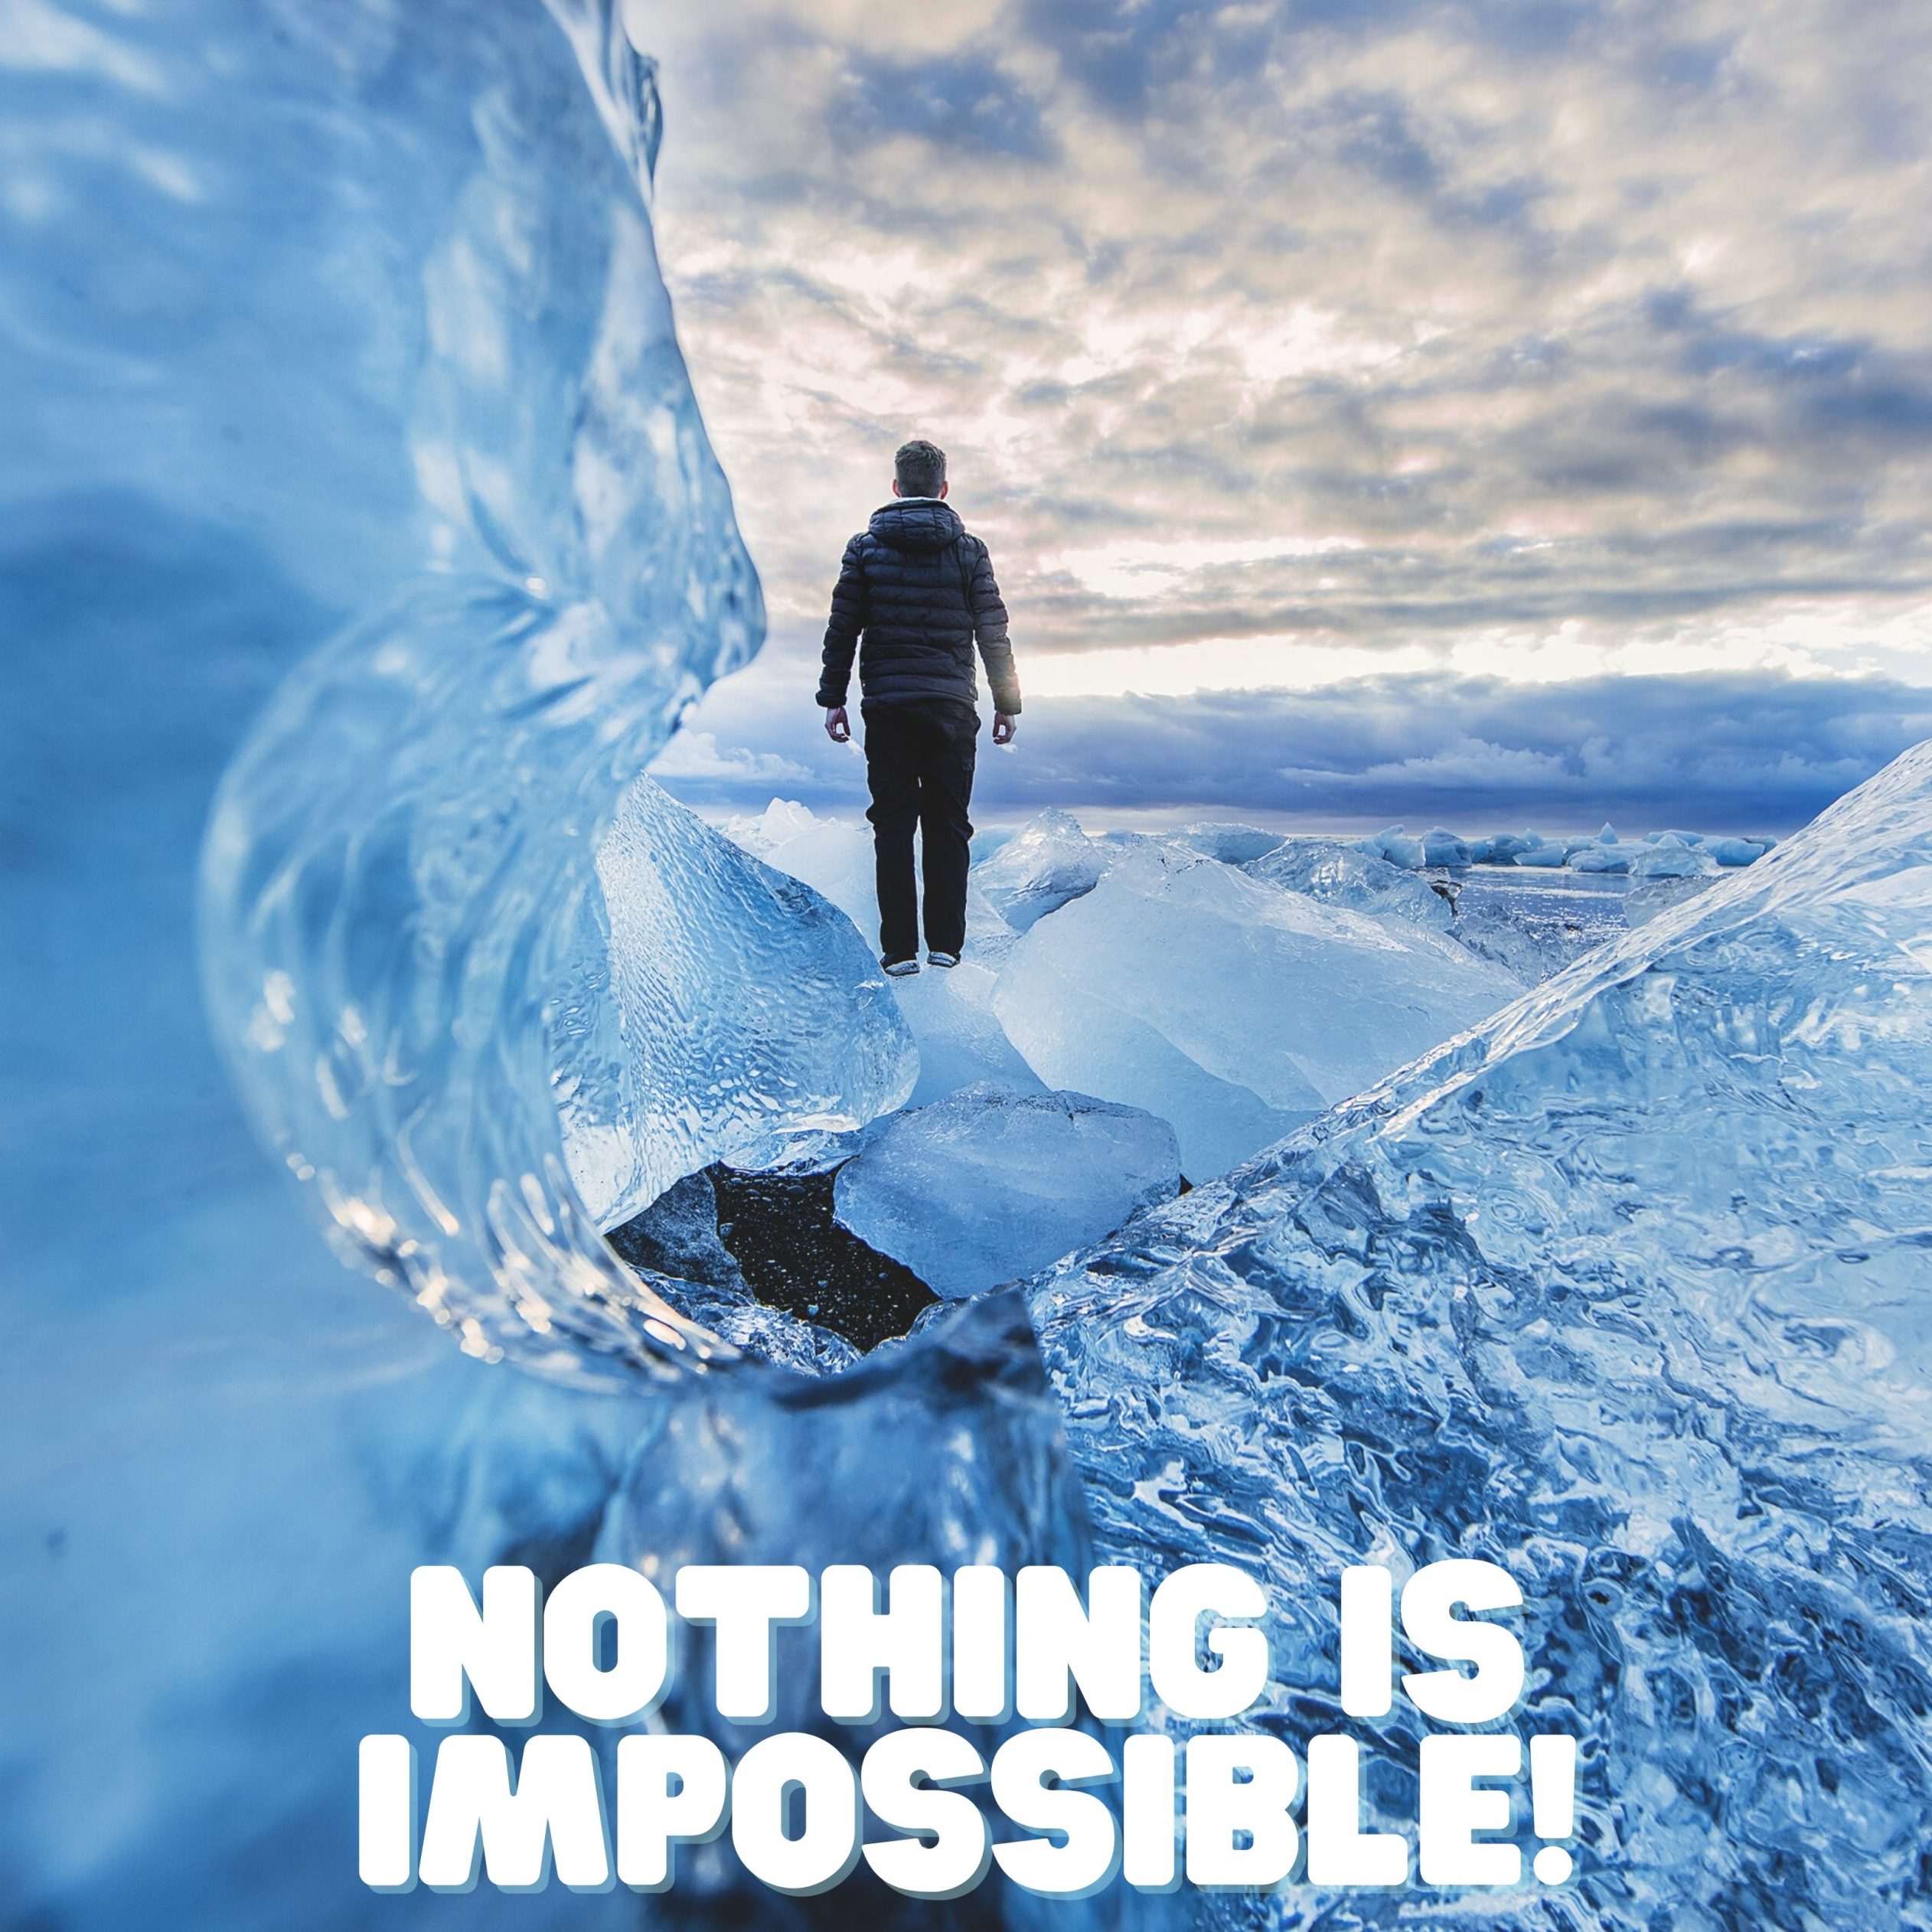 2524x2524 Parallax wallpaper 4k Nothing Is Impossible Quote iPad Wallpaper 2524x2524 pixels resolution